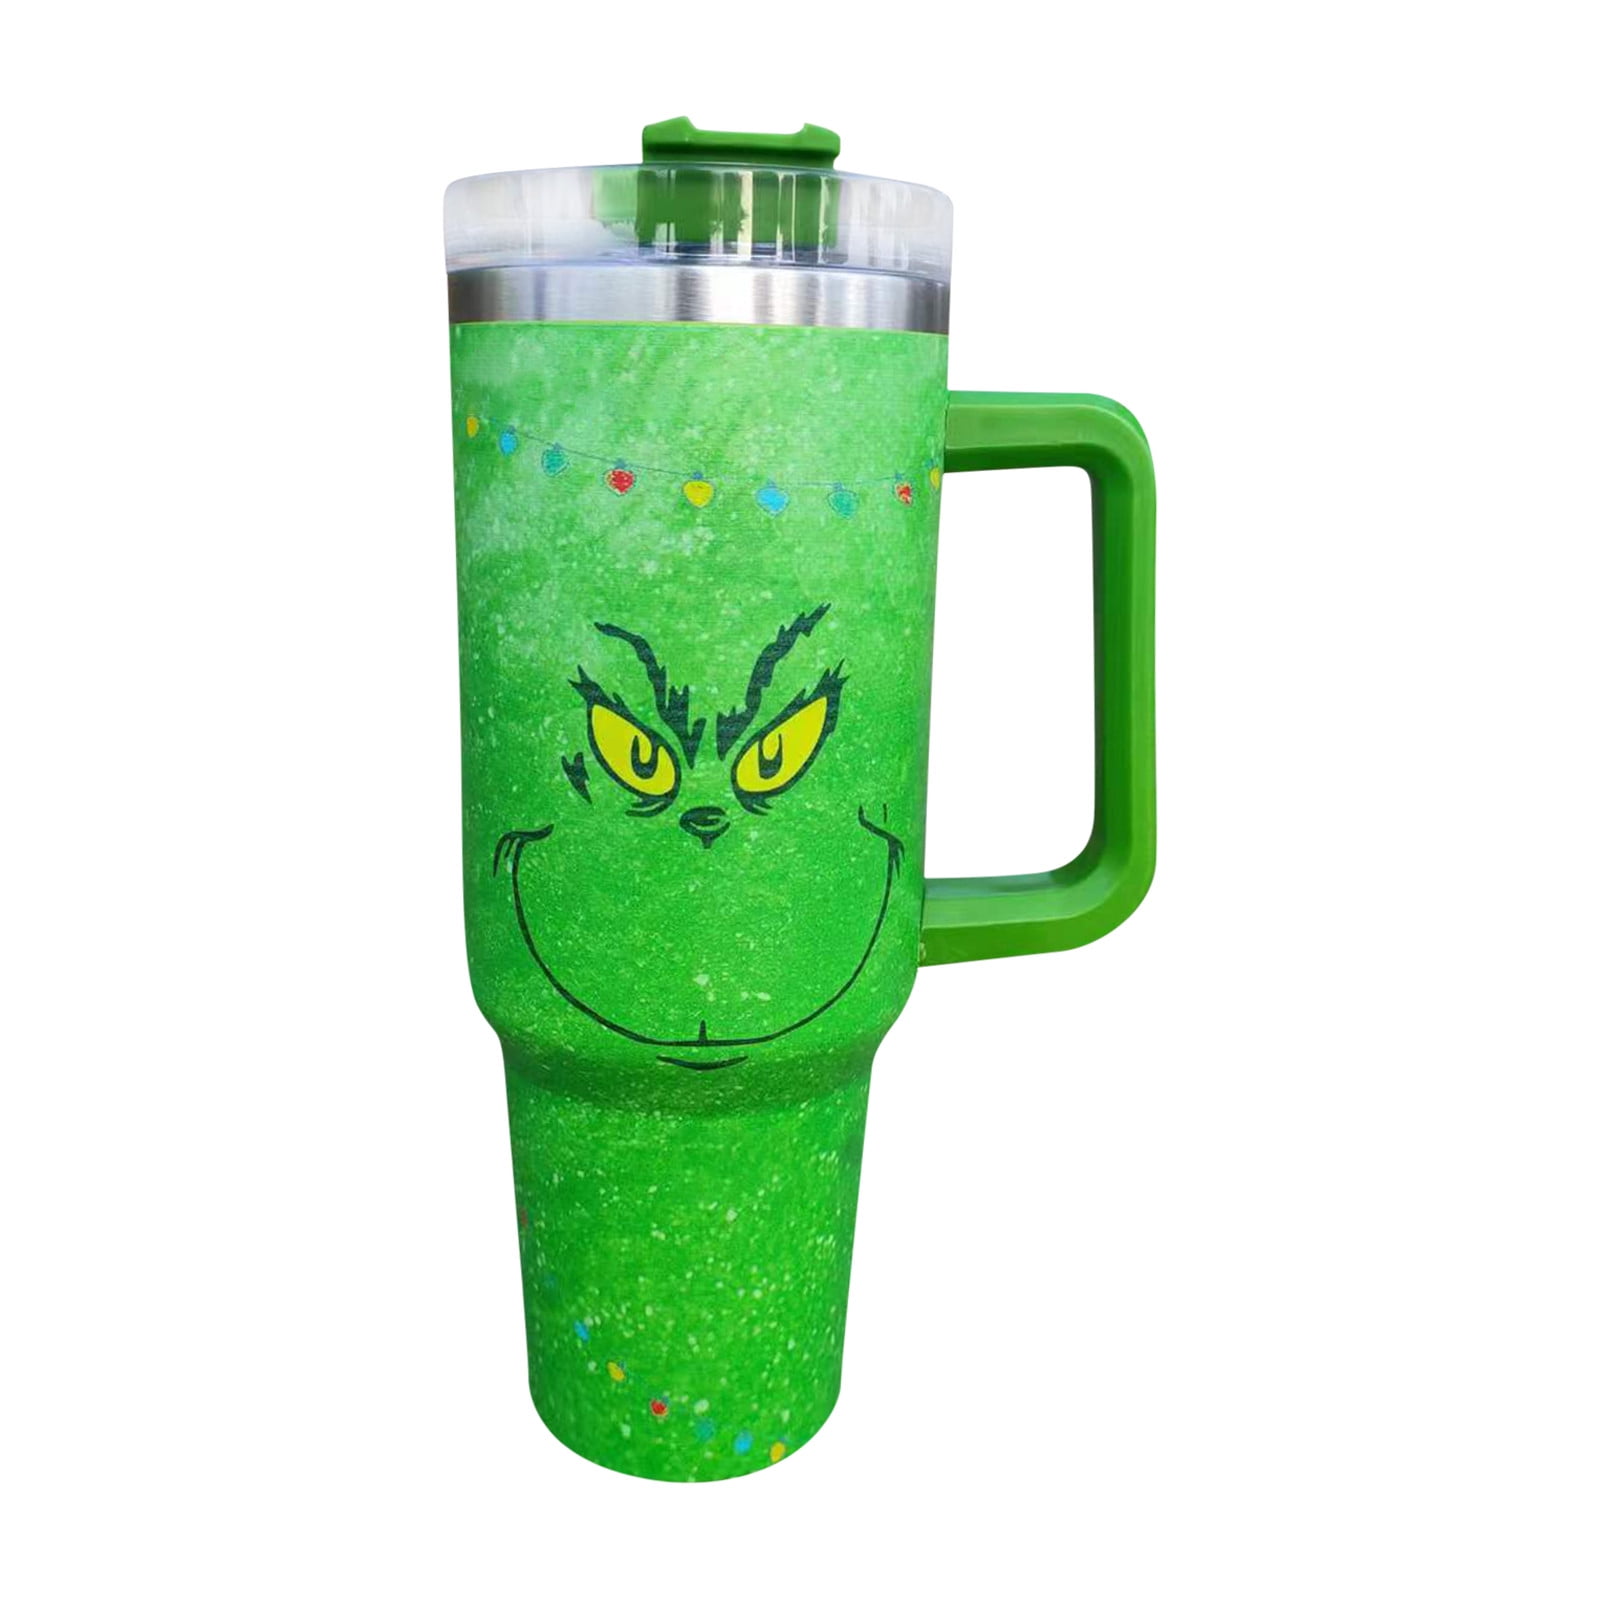 THE GRINCH STAINLESS STEEL TUMBLER WITH STRAW 40 OZ. NEW.